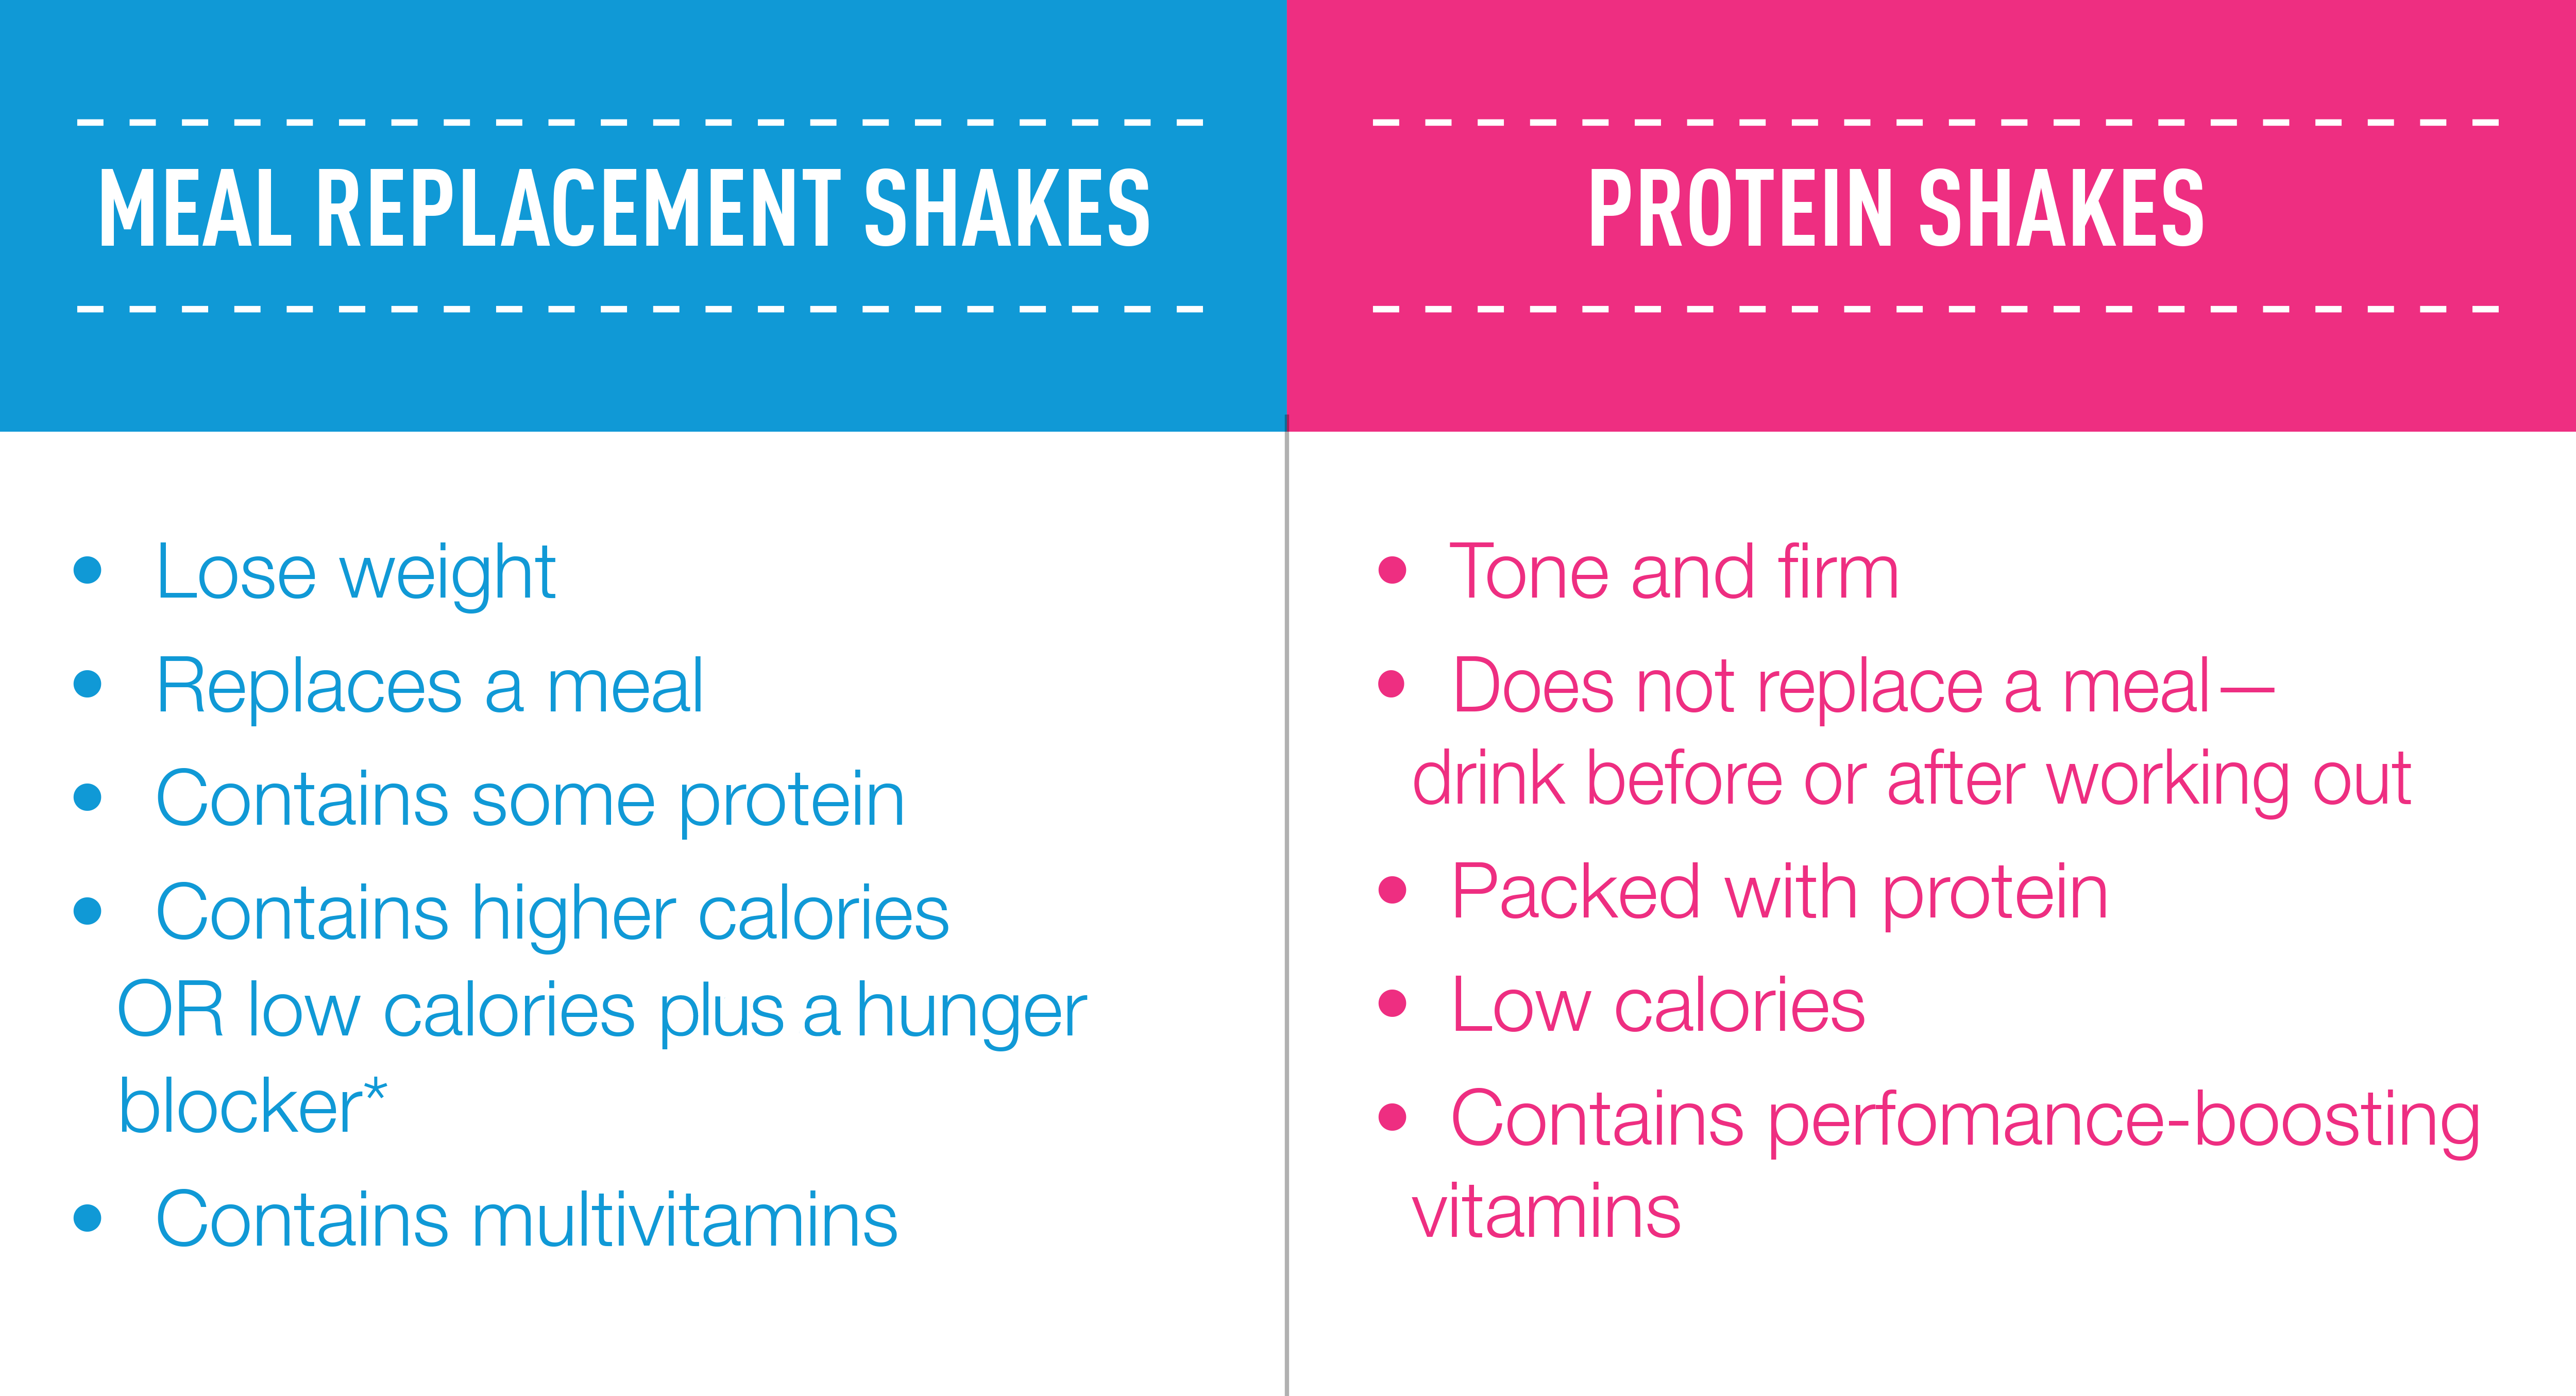 Protein Shake v. Meal Replacement Shake 